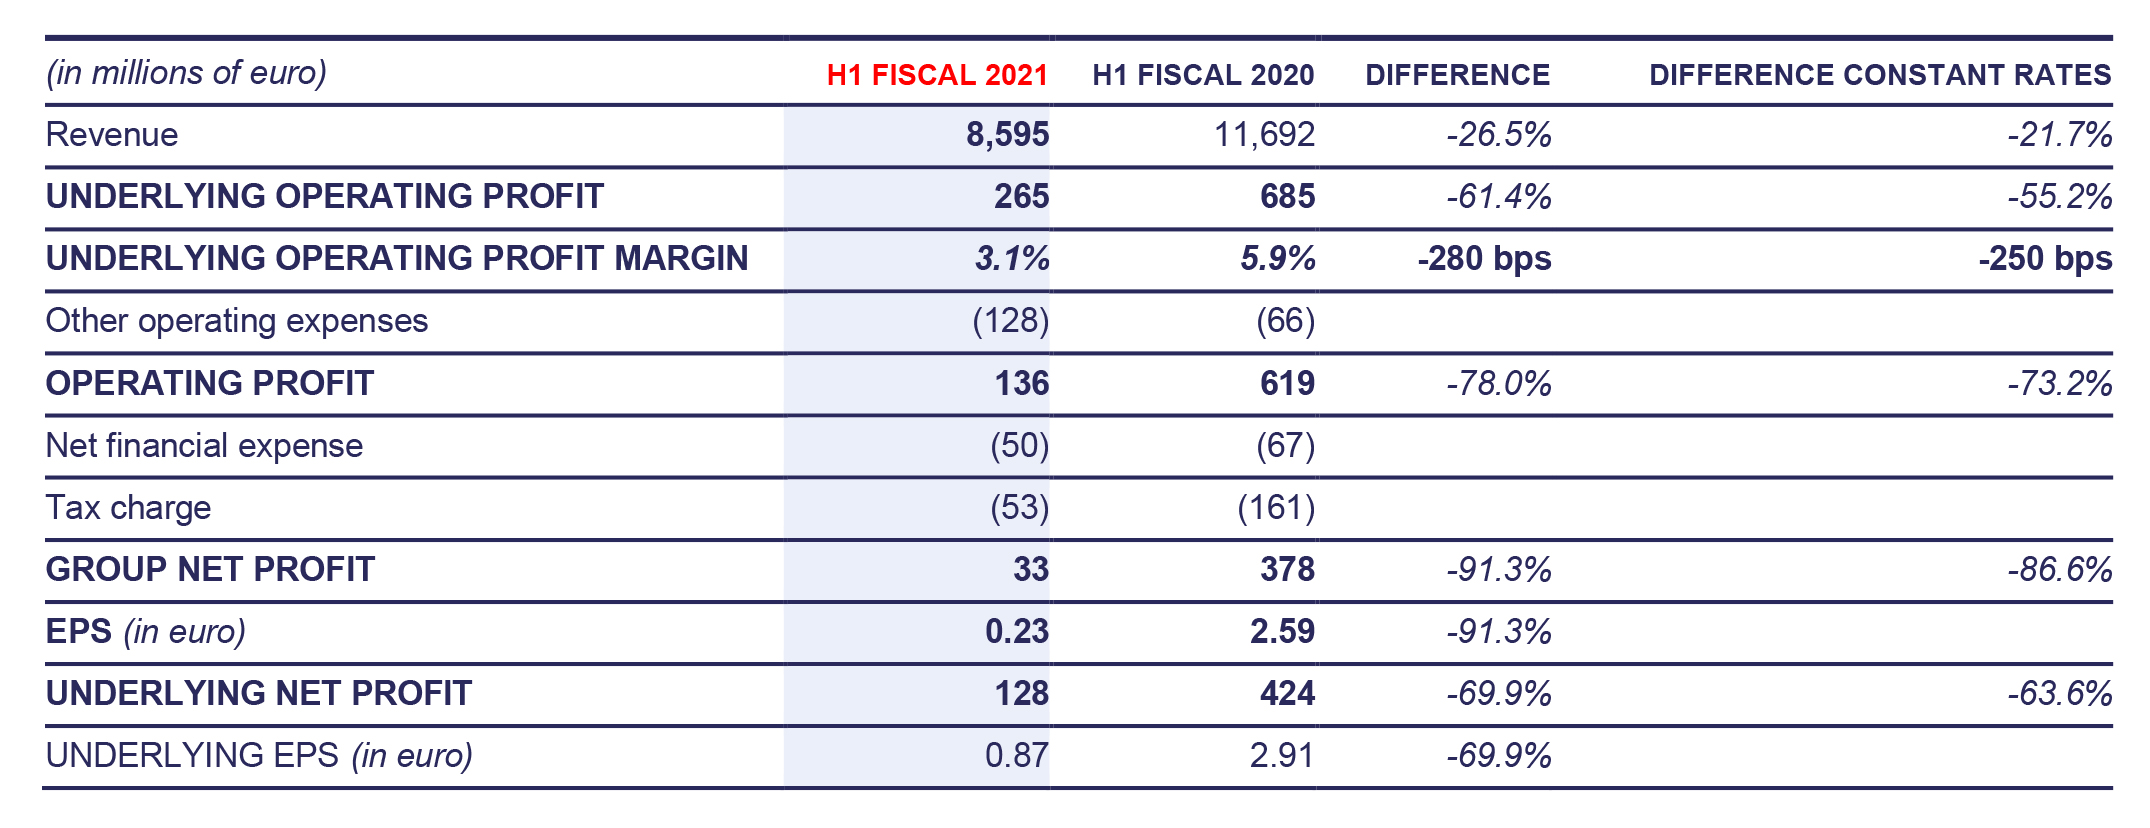 Financial performance for First Half Fiscal 2021